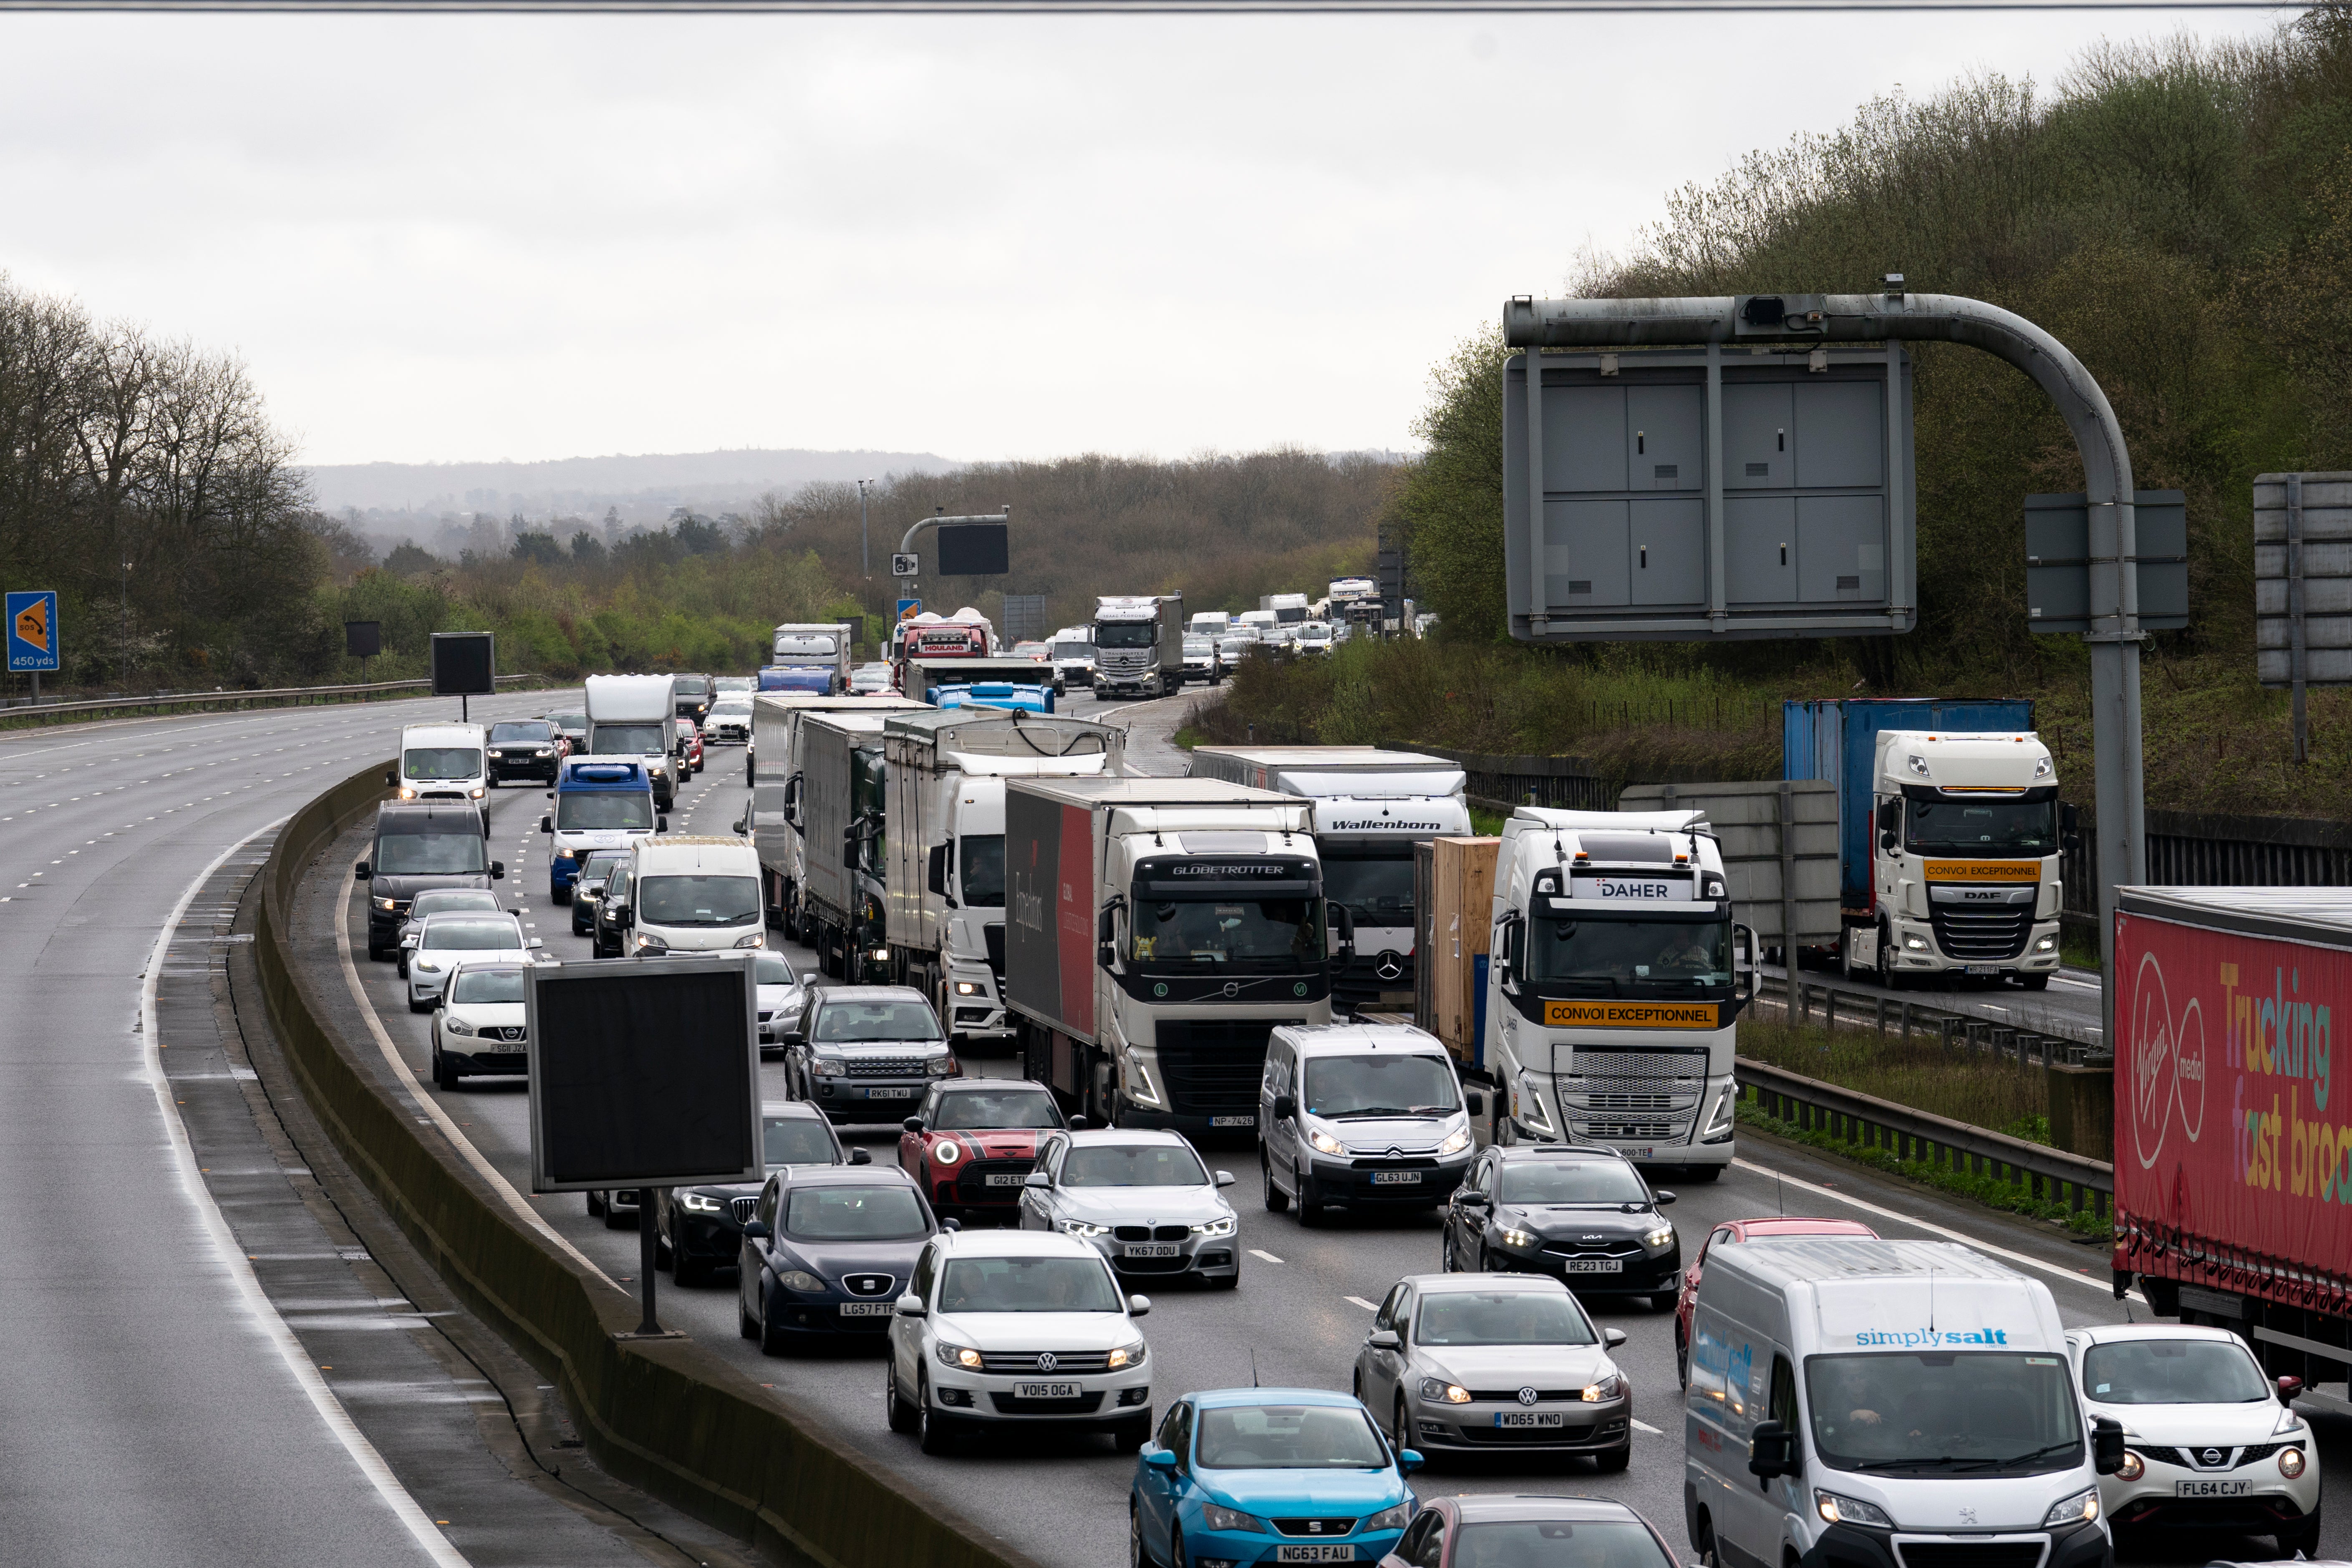 All four lanes of the M25 have been closed between Junction 6 and Junction 5 following the crash